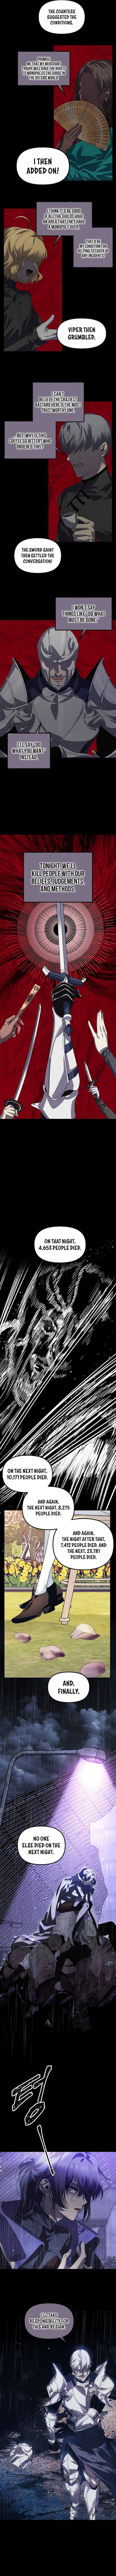 SSS-Class Suicide Hunter, Chapter 91 image 06